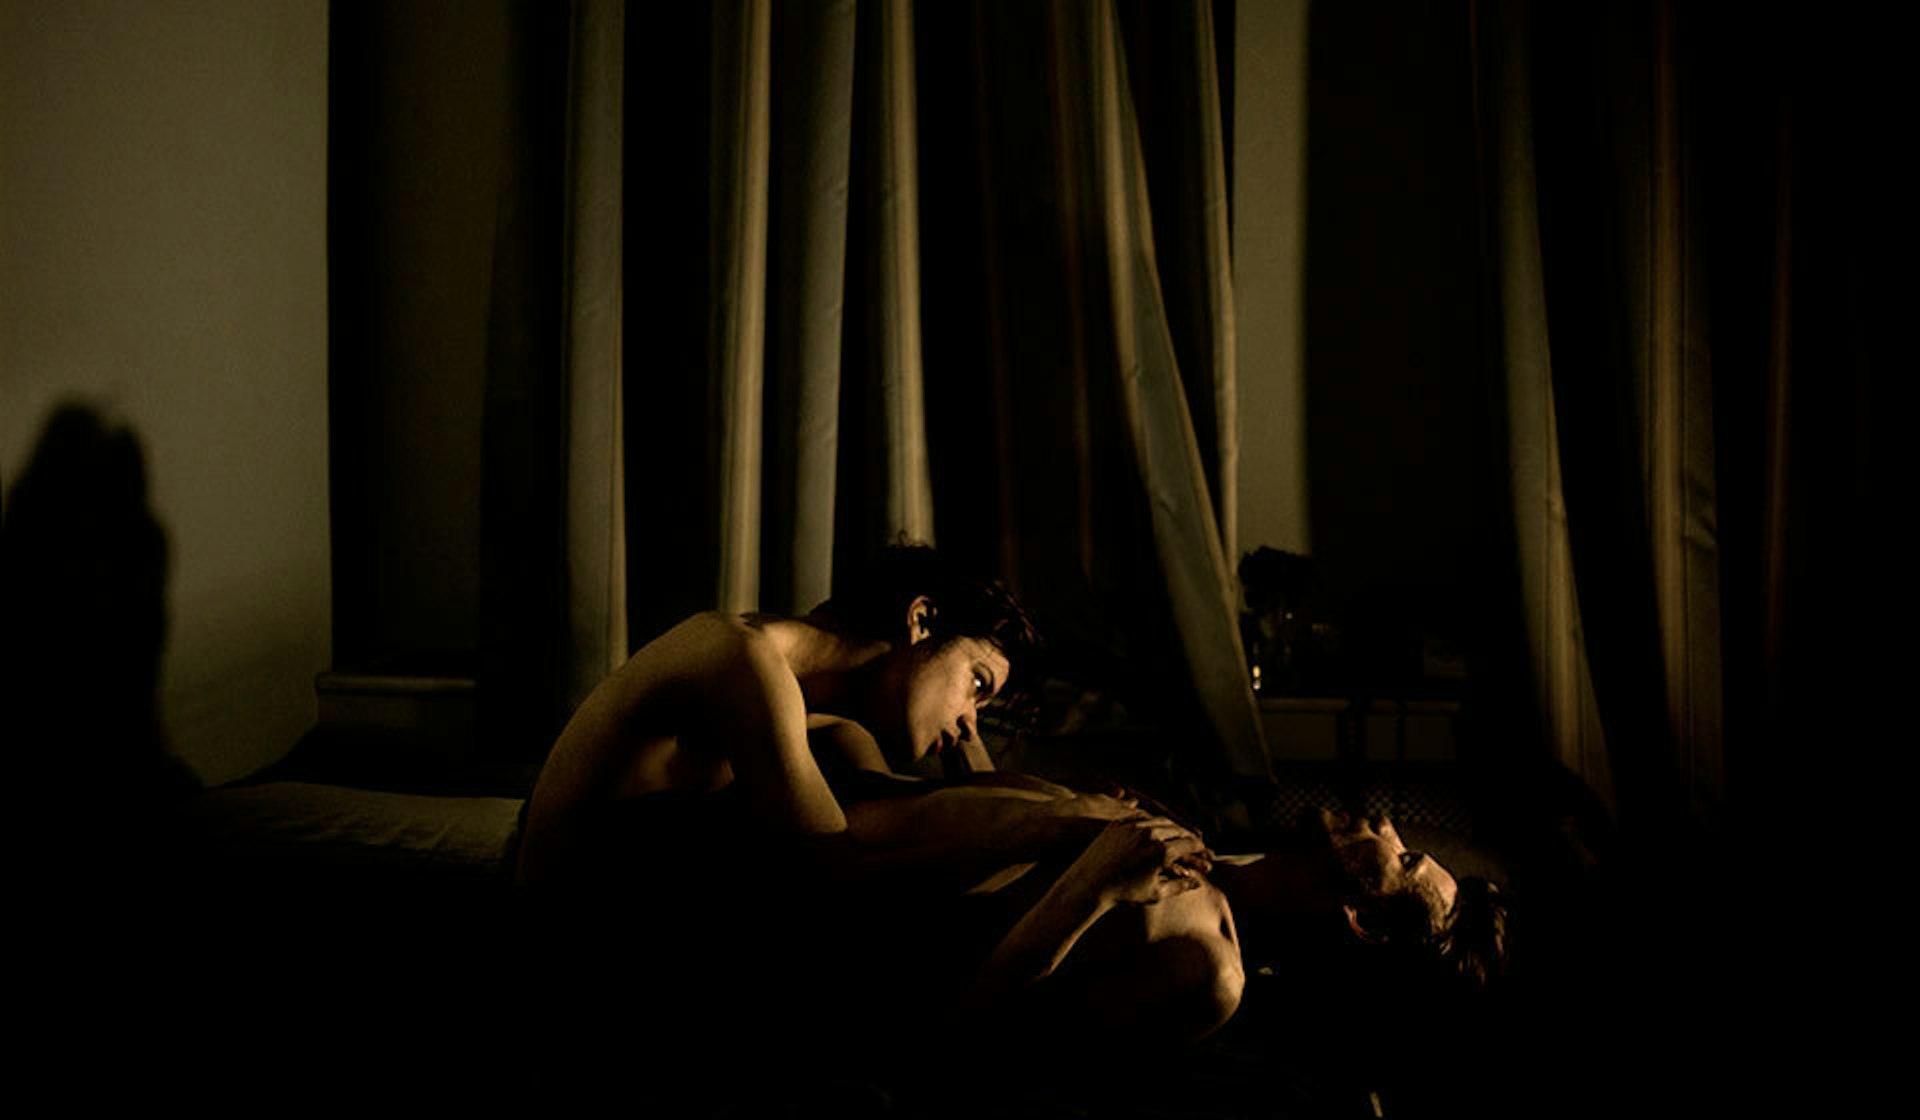 An image of love takes World Press Photo awards by storm